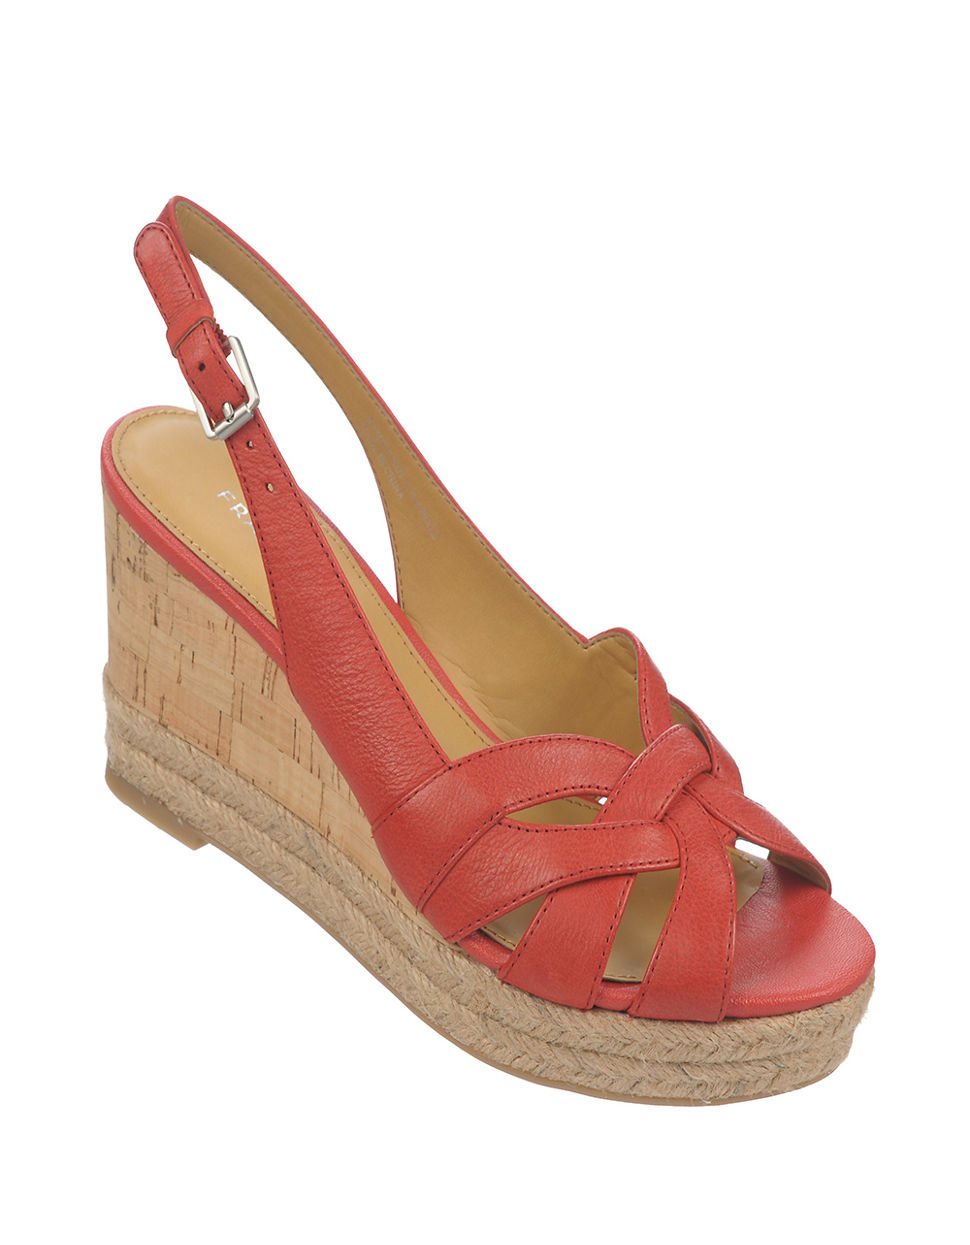 Lyst - Franco Sarto Kris Leather Wedge Sandals in Red